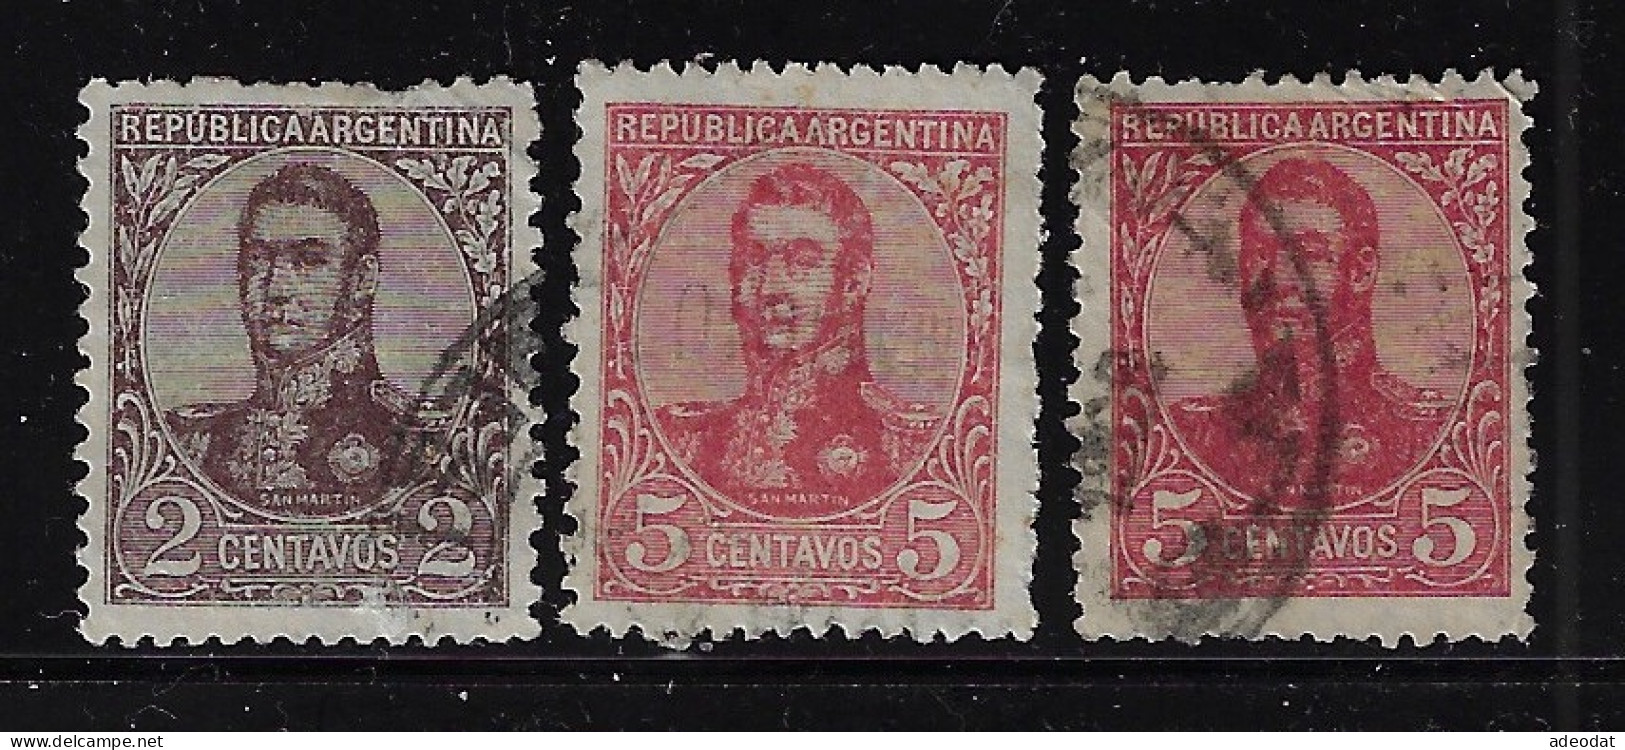 ARGENTINA  1908  SCOTT #146,149(2) USED - Used Stamps